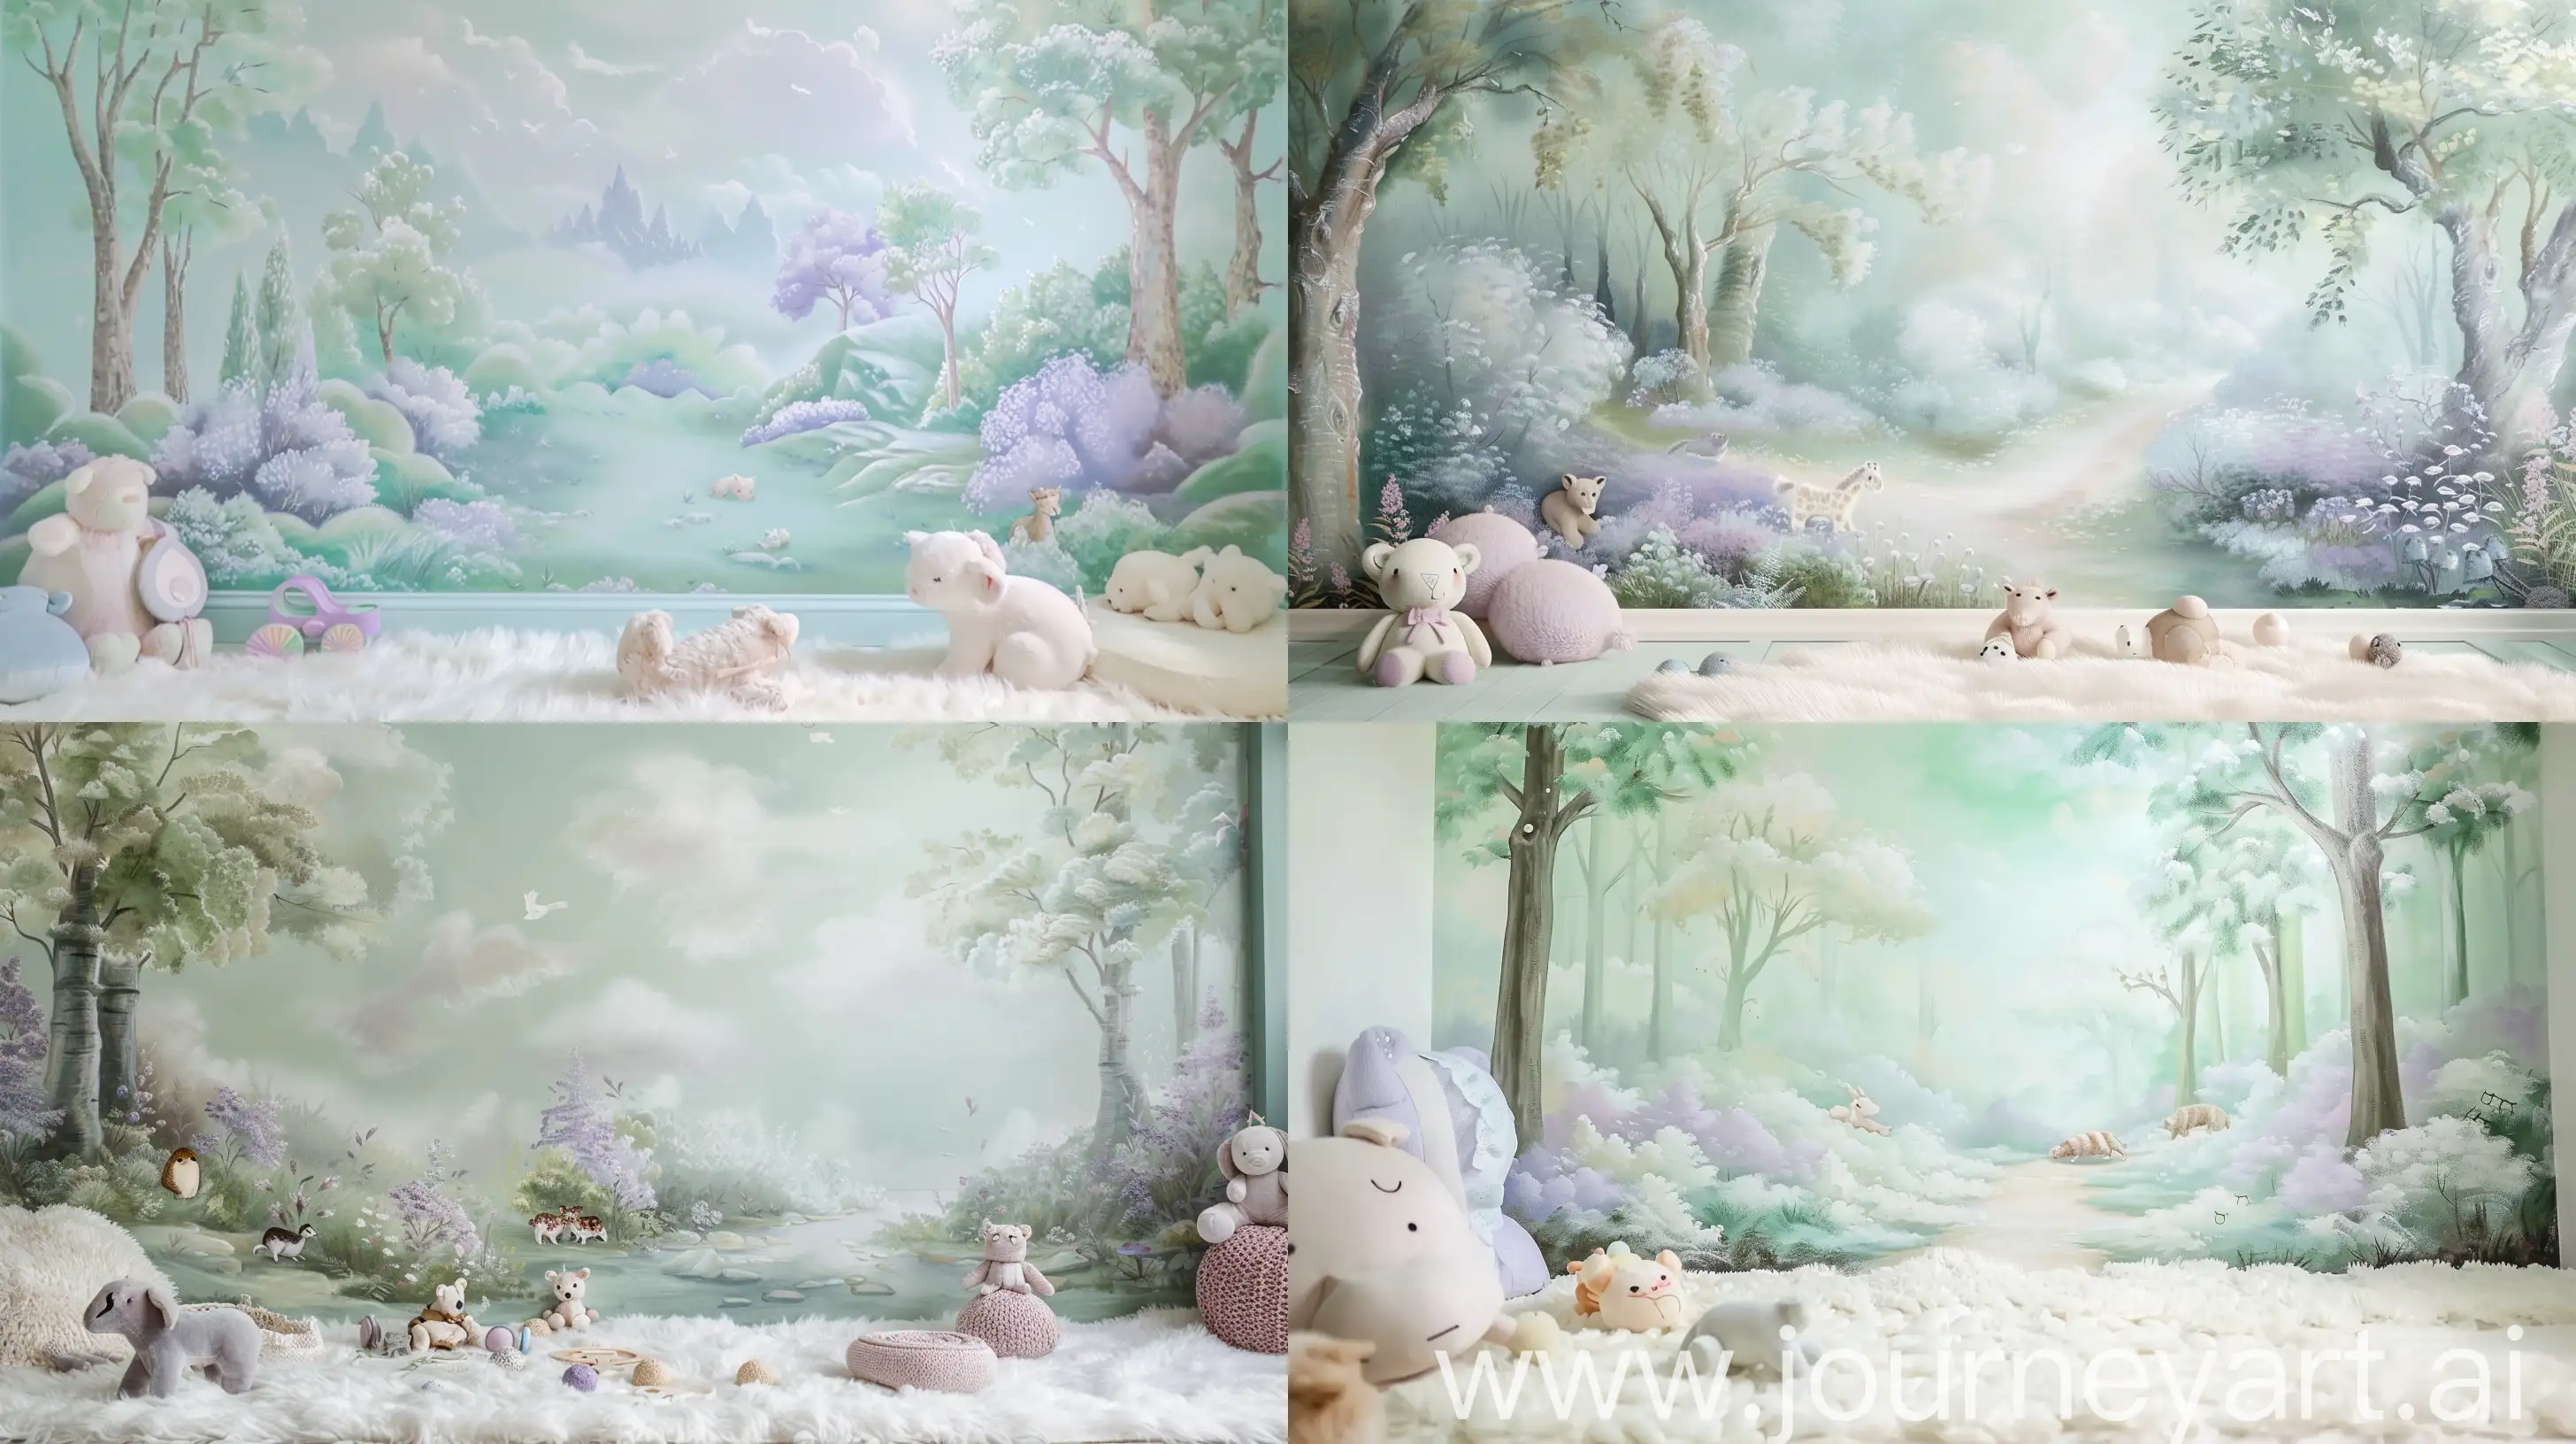 Enchanting-Nursery-Room-with-Magical-Forest-Mural-and-Plush-Animal-Toys